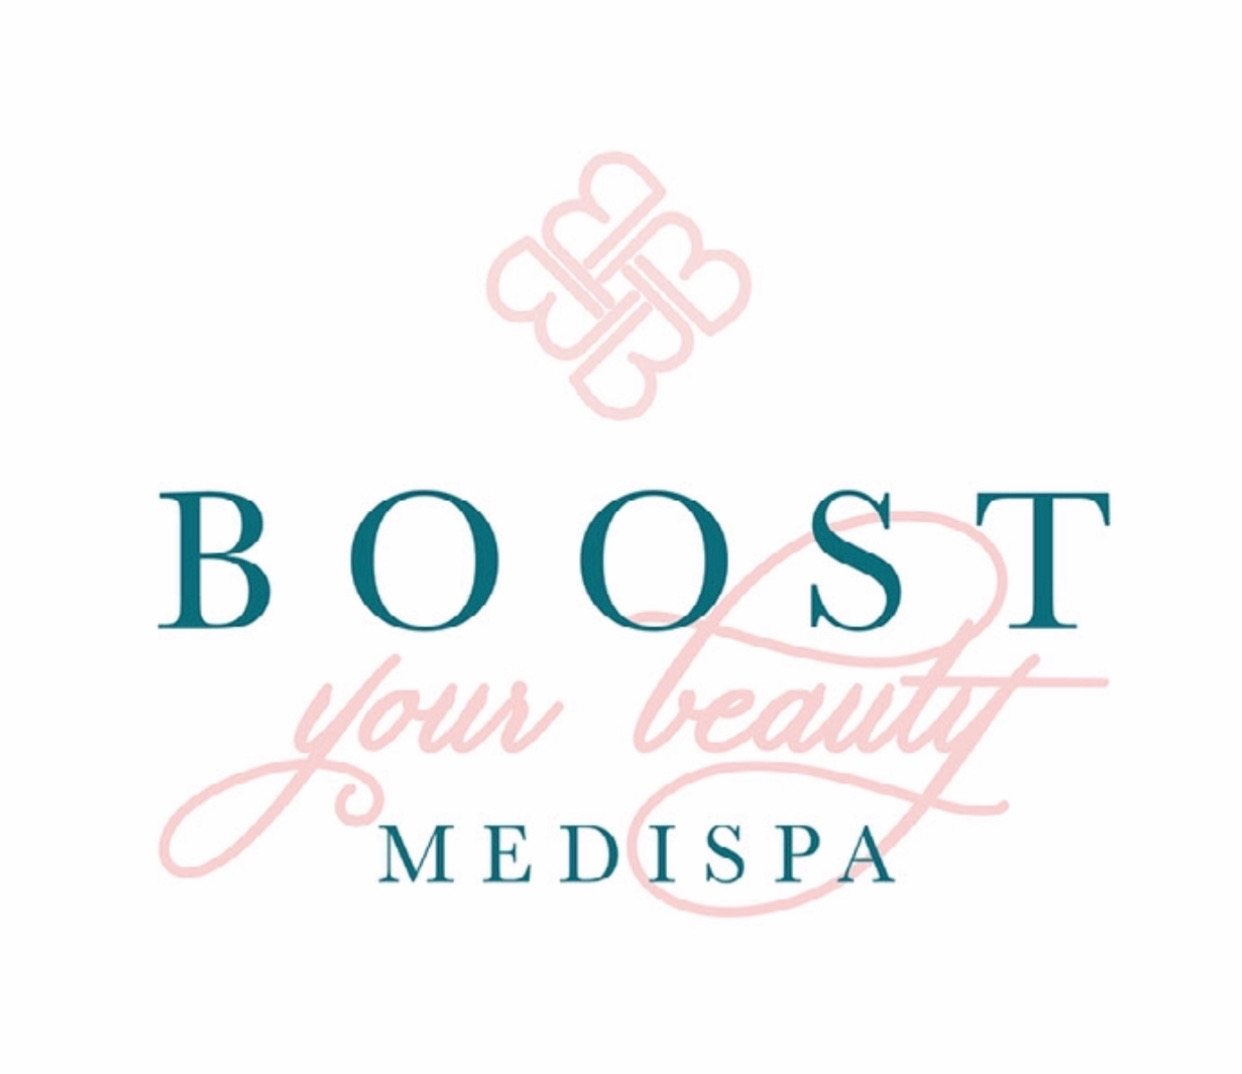 Gerald A. Acker, MD managed by Boost Your Beauty Medispa: Mena Abitino-Howe, PA-C